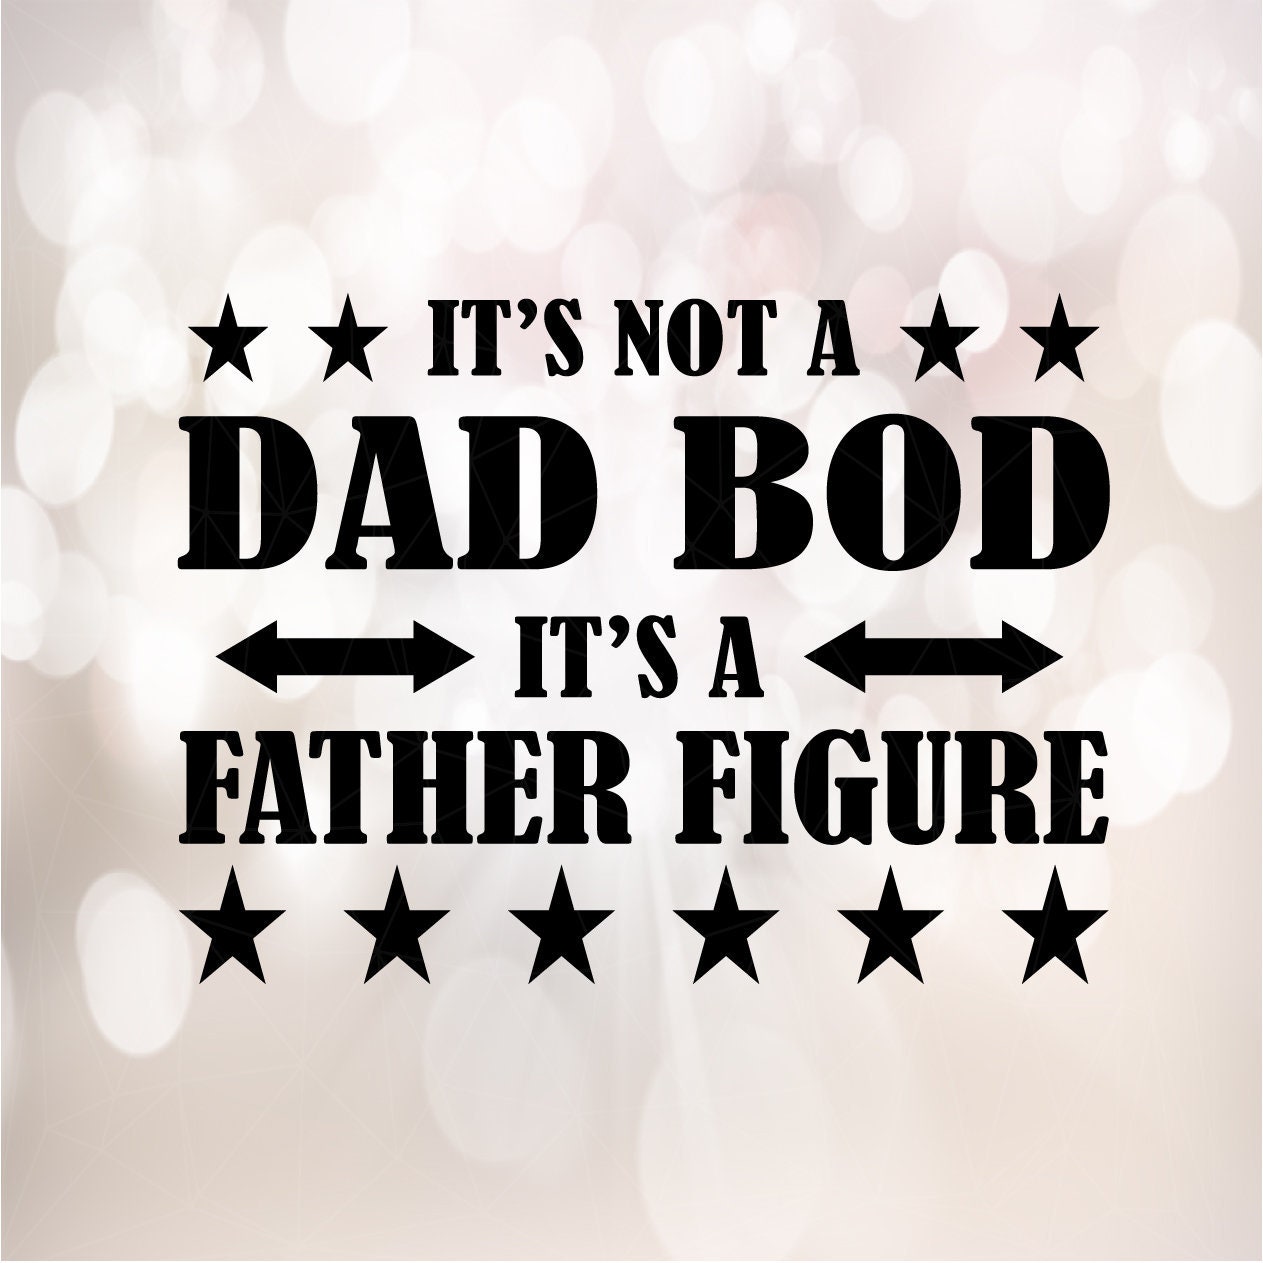 It's not a dad bod it's a father figure svg eps dxf | Etsy